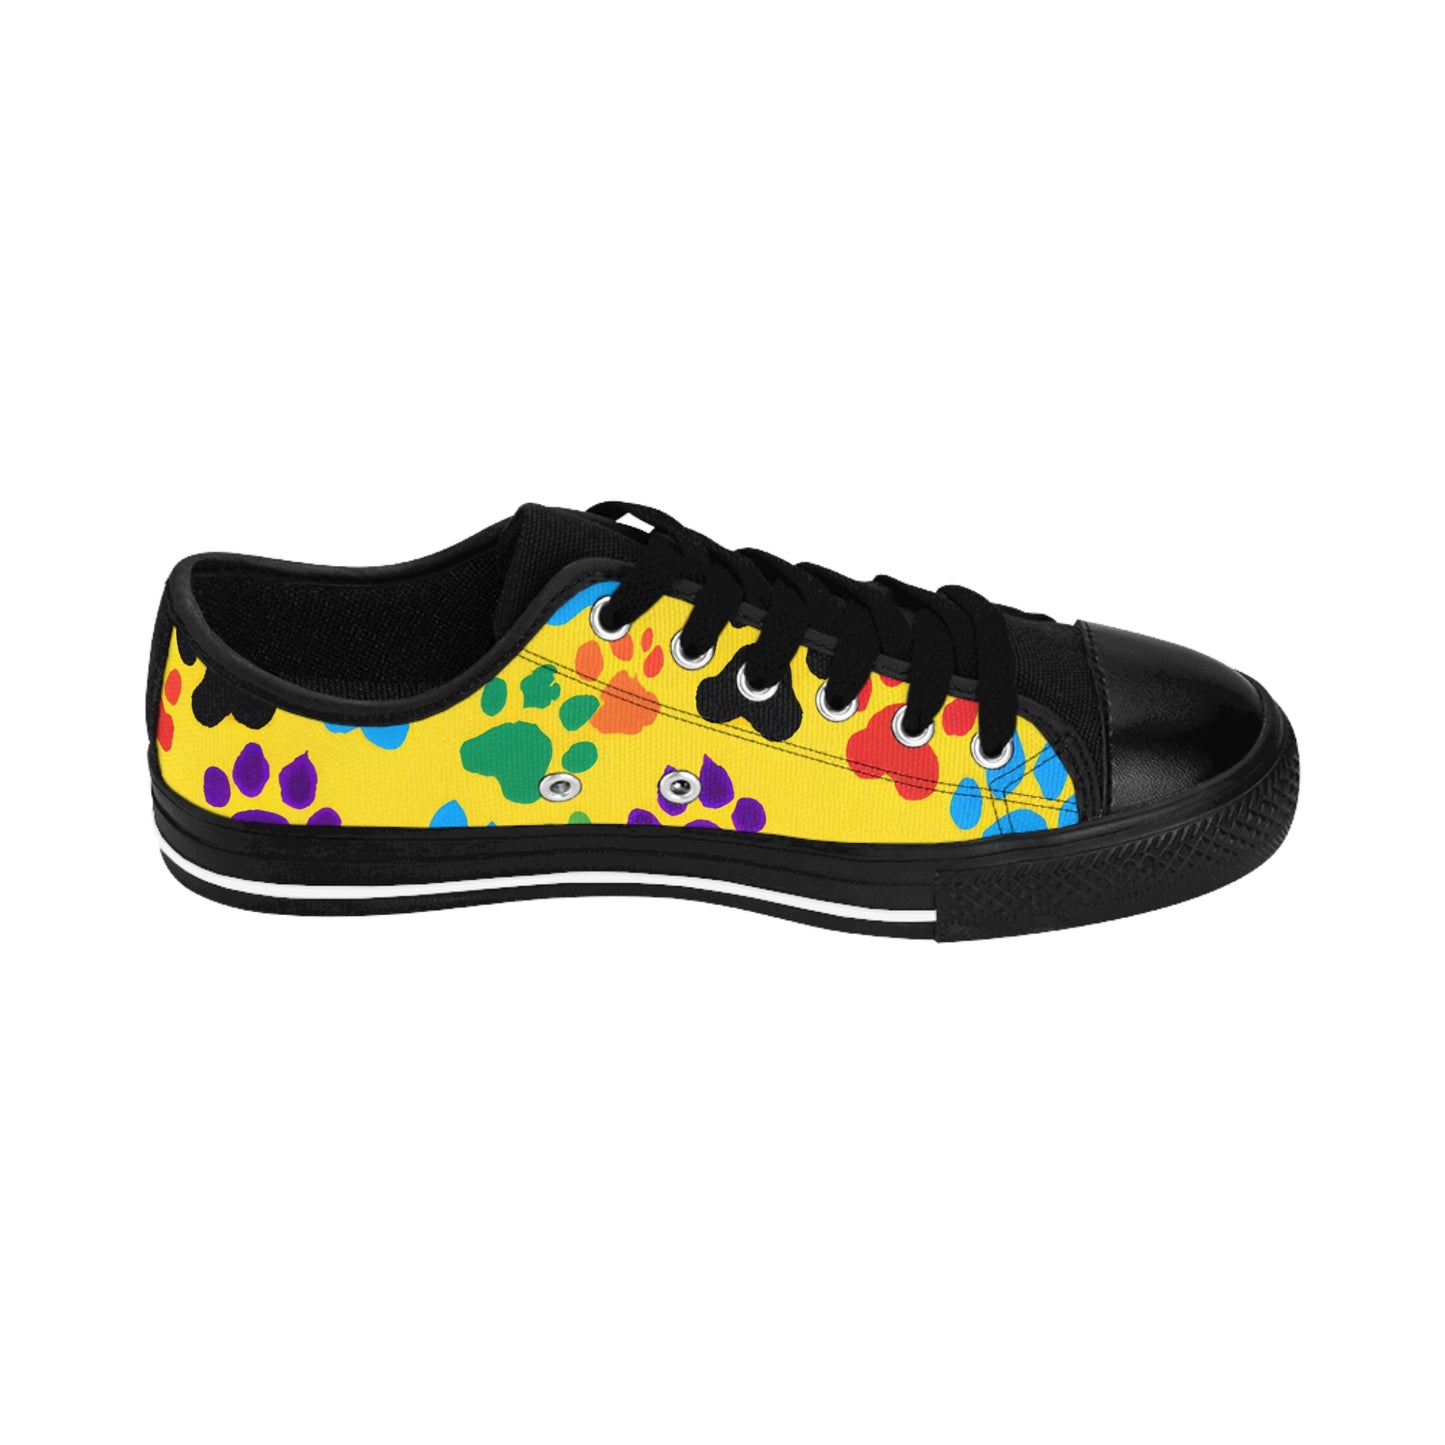 Amelie Chaussures - Paw Print - Low-Top